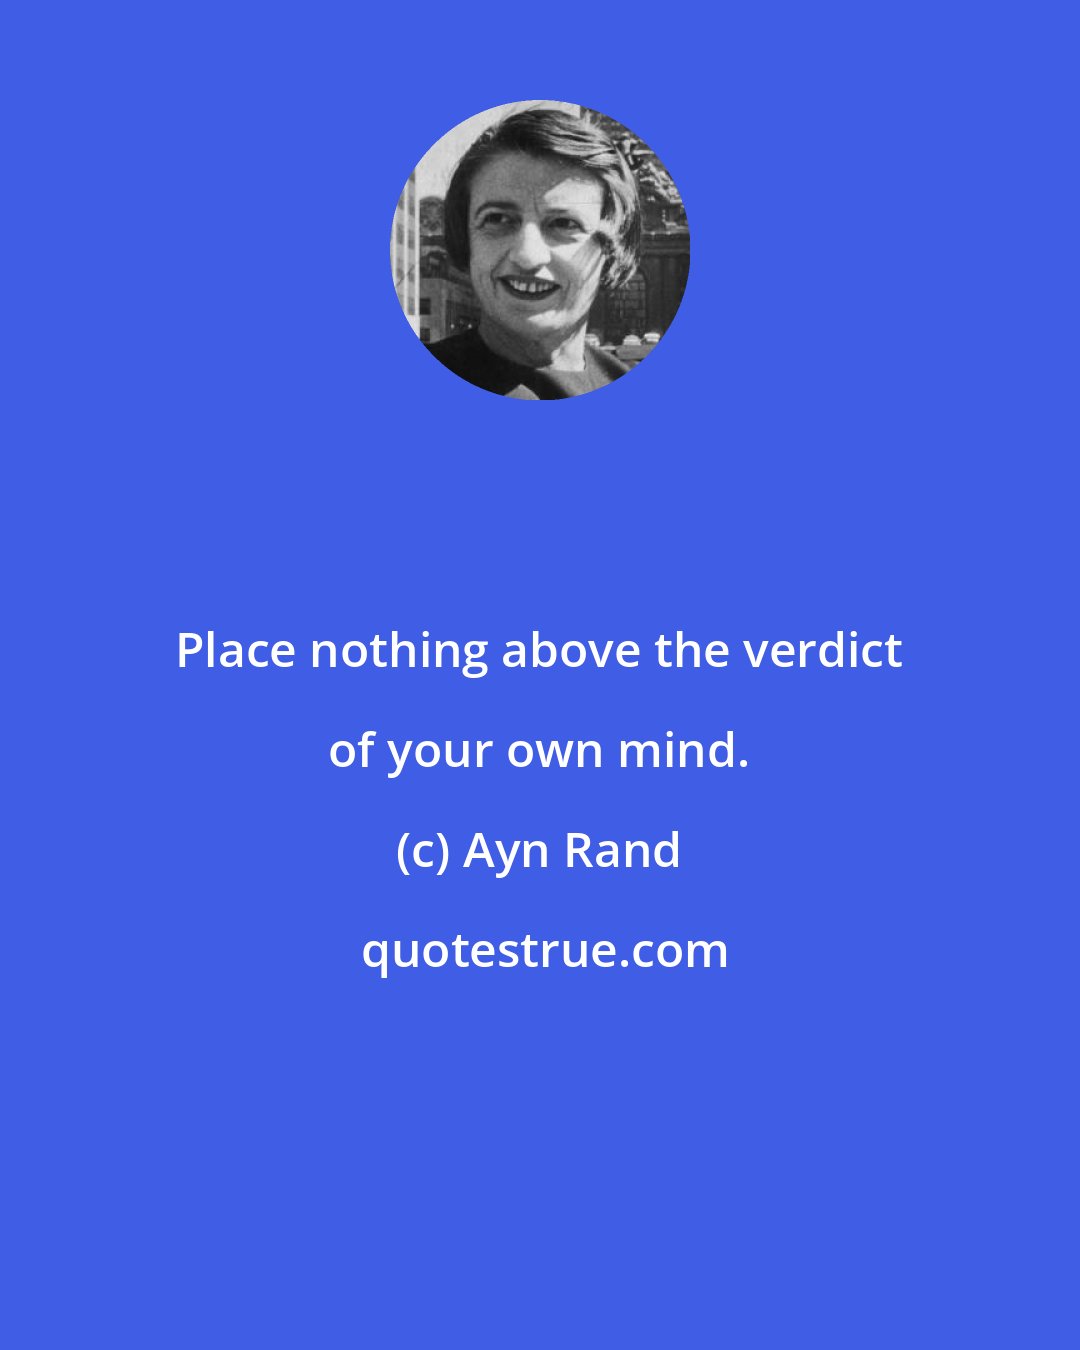 Ayn Rand: Place nothing above the verdict of your own mind.